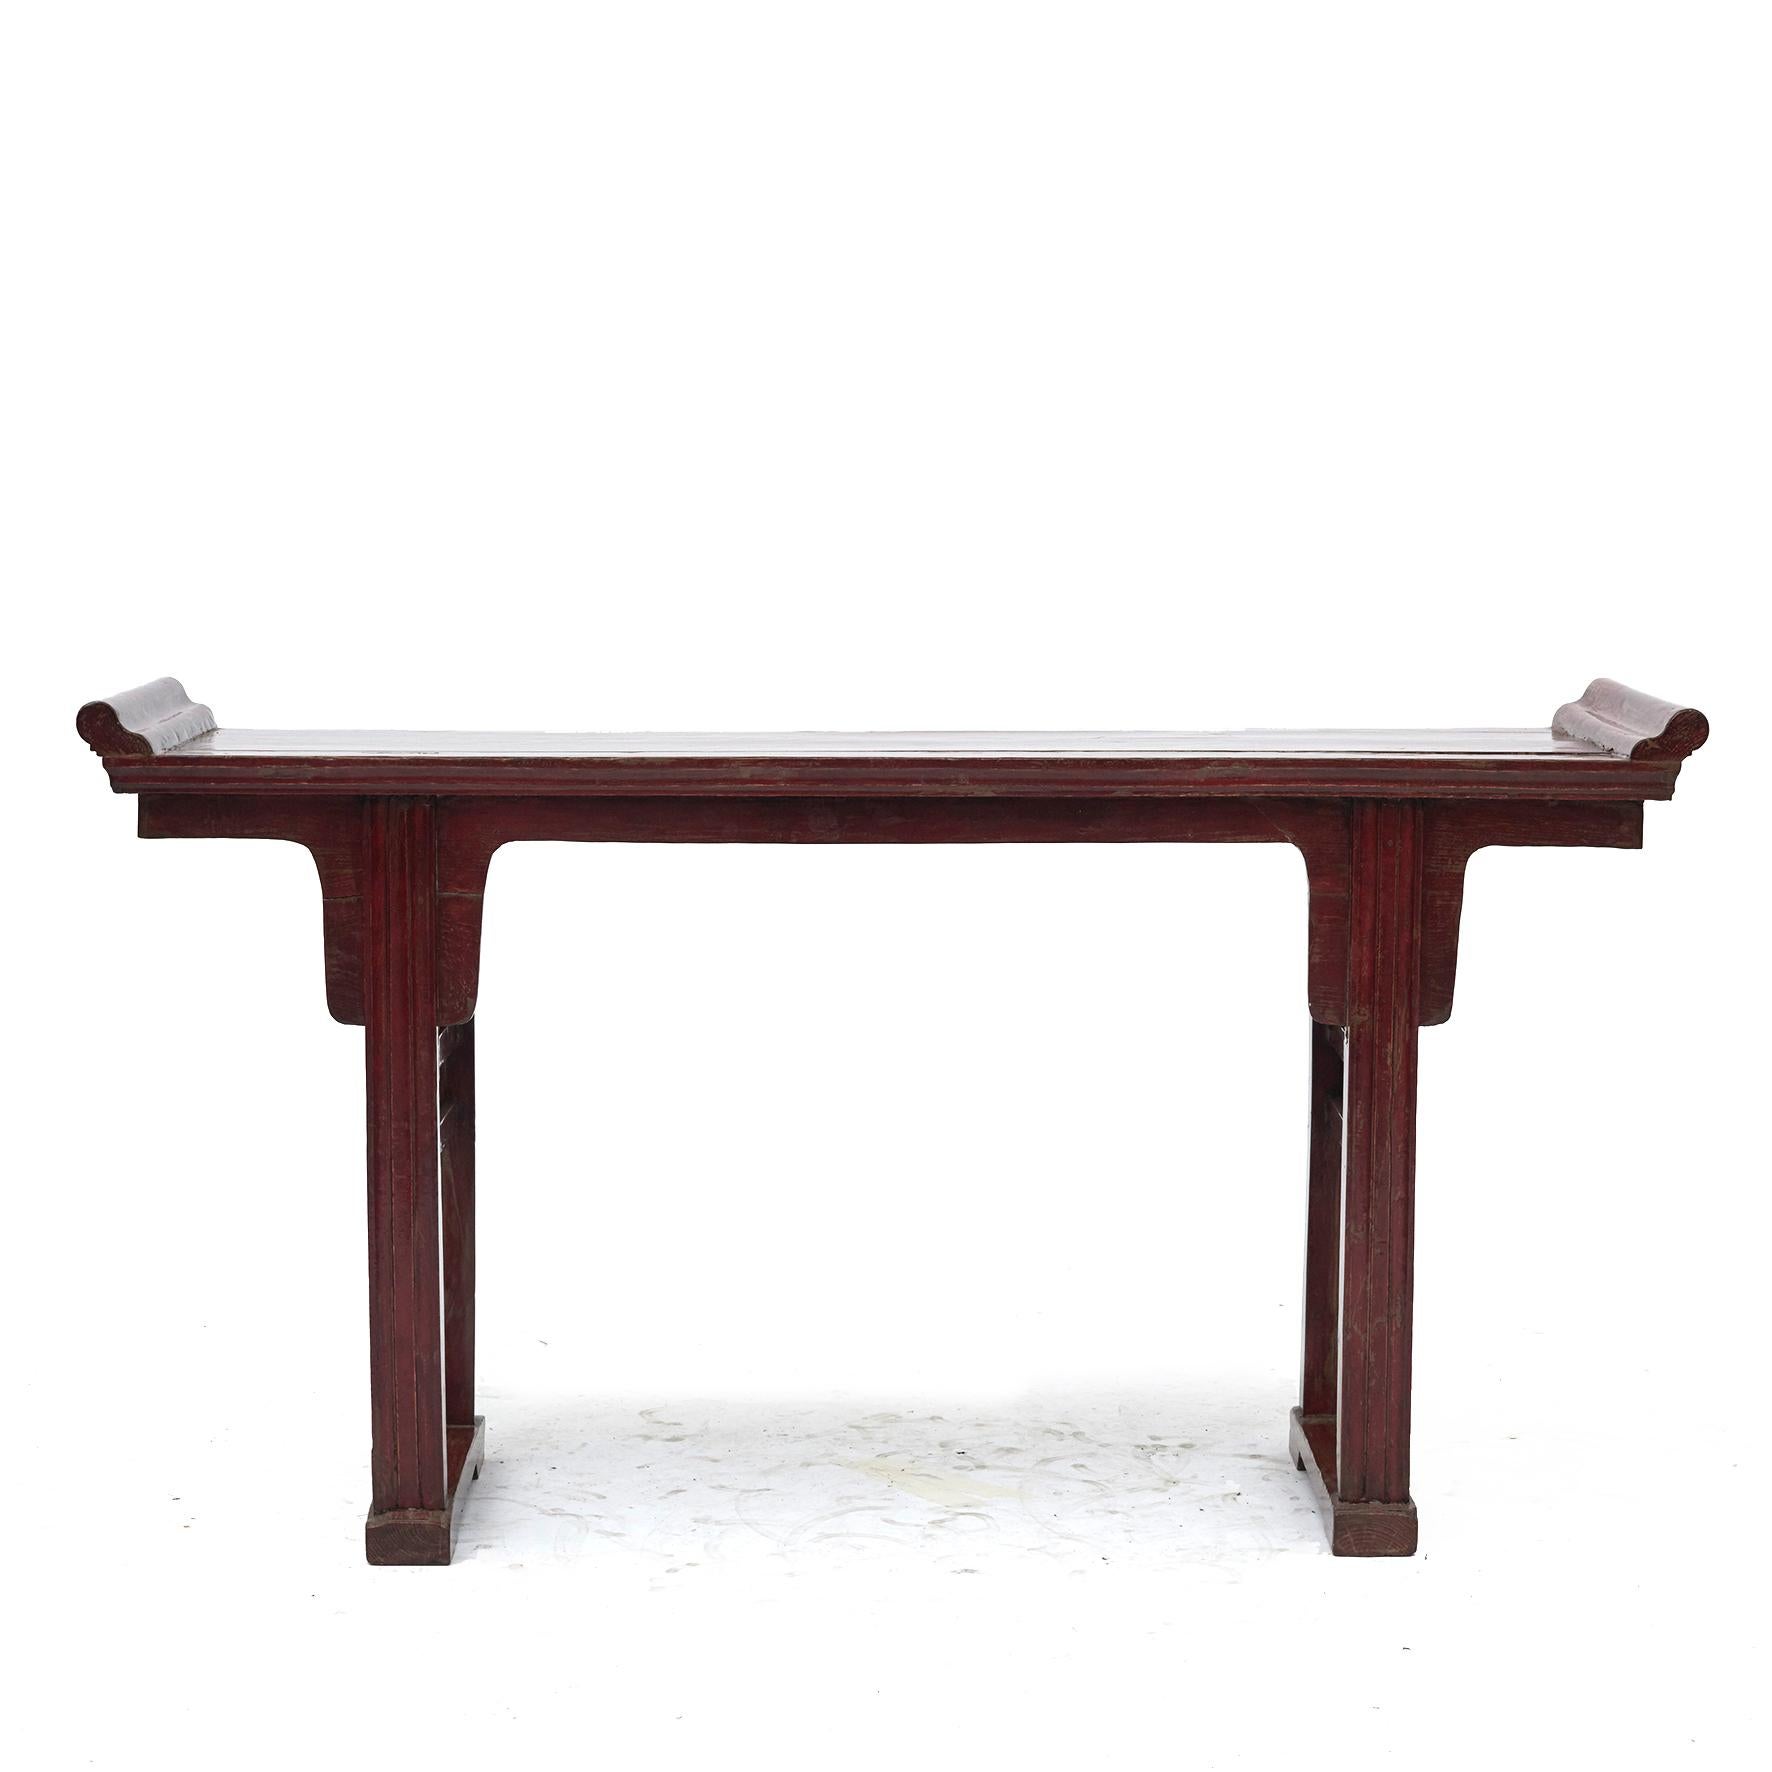 Altar table/console table, original red lacquer with natural age-related patina, highlighted by a clear lacquer surface finish. Front side with profiled legs. Table top with 'wings' console tables with wings are often called altar tables.
Most were